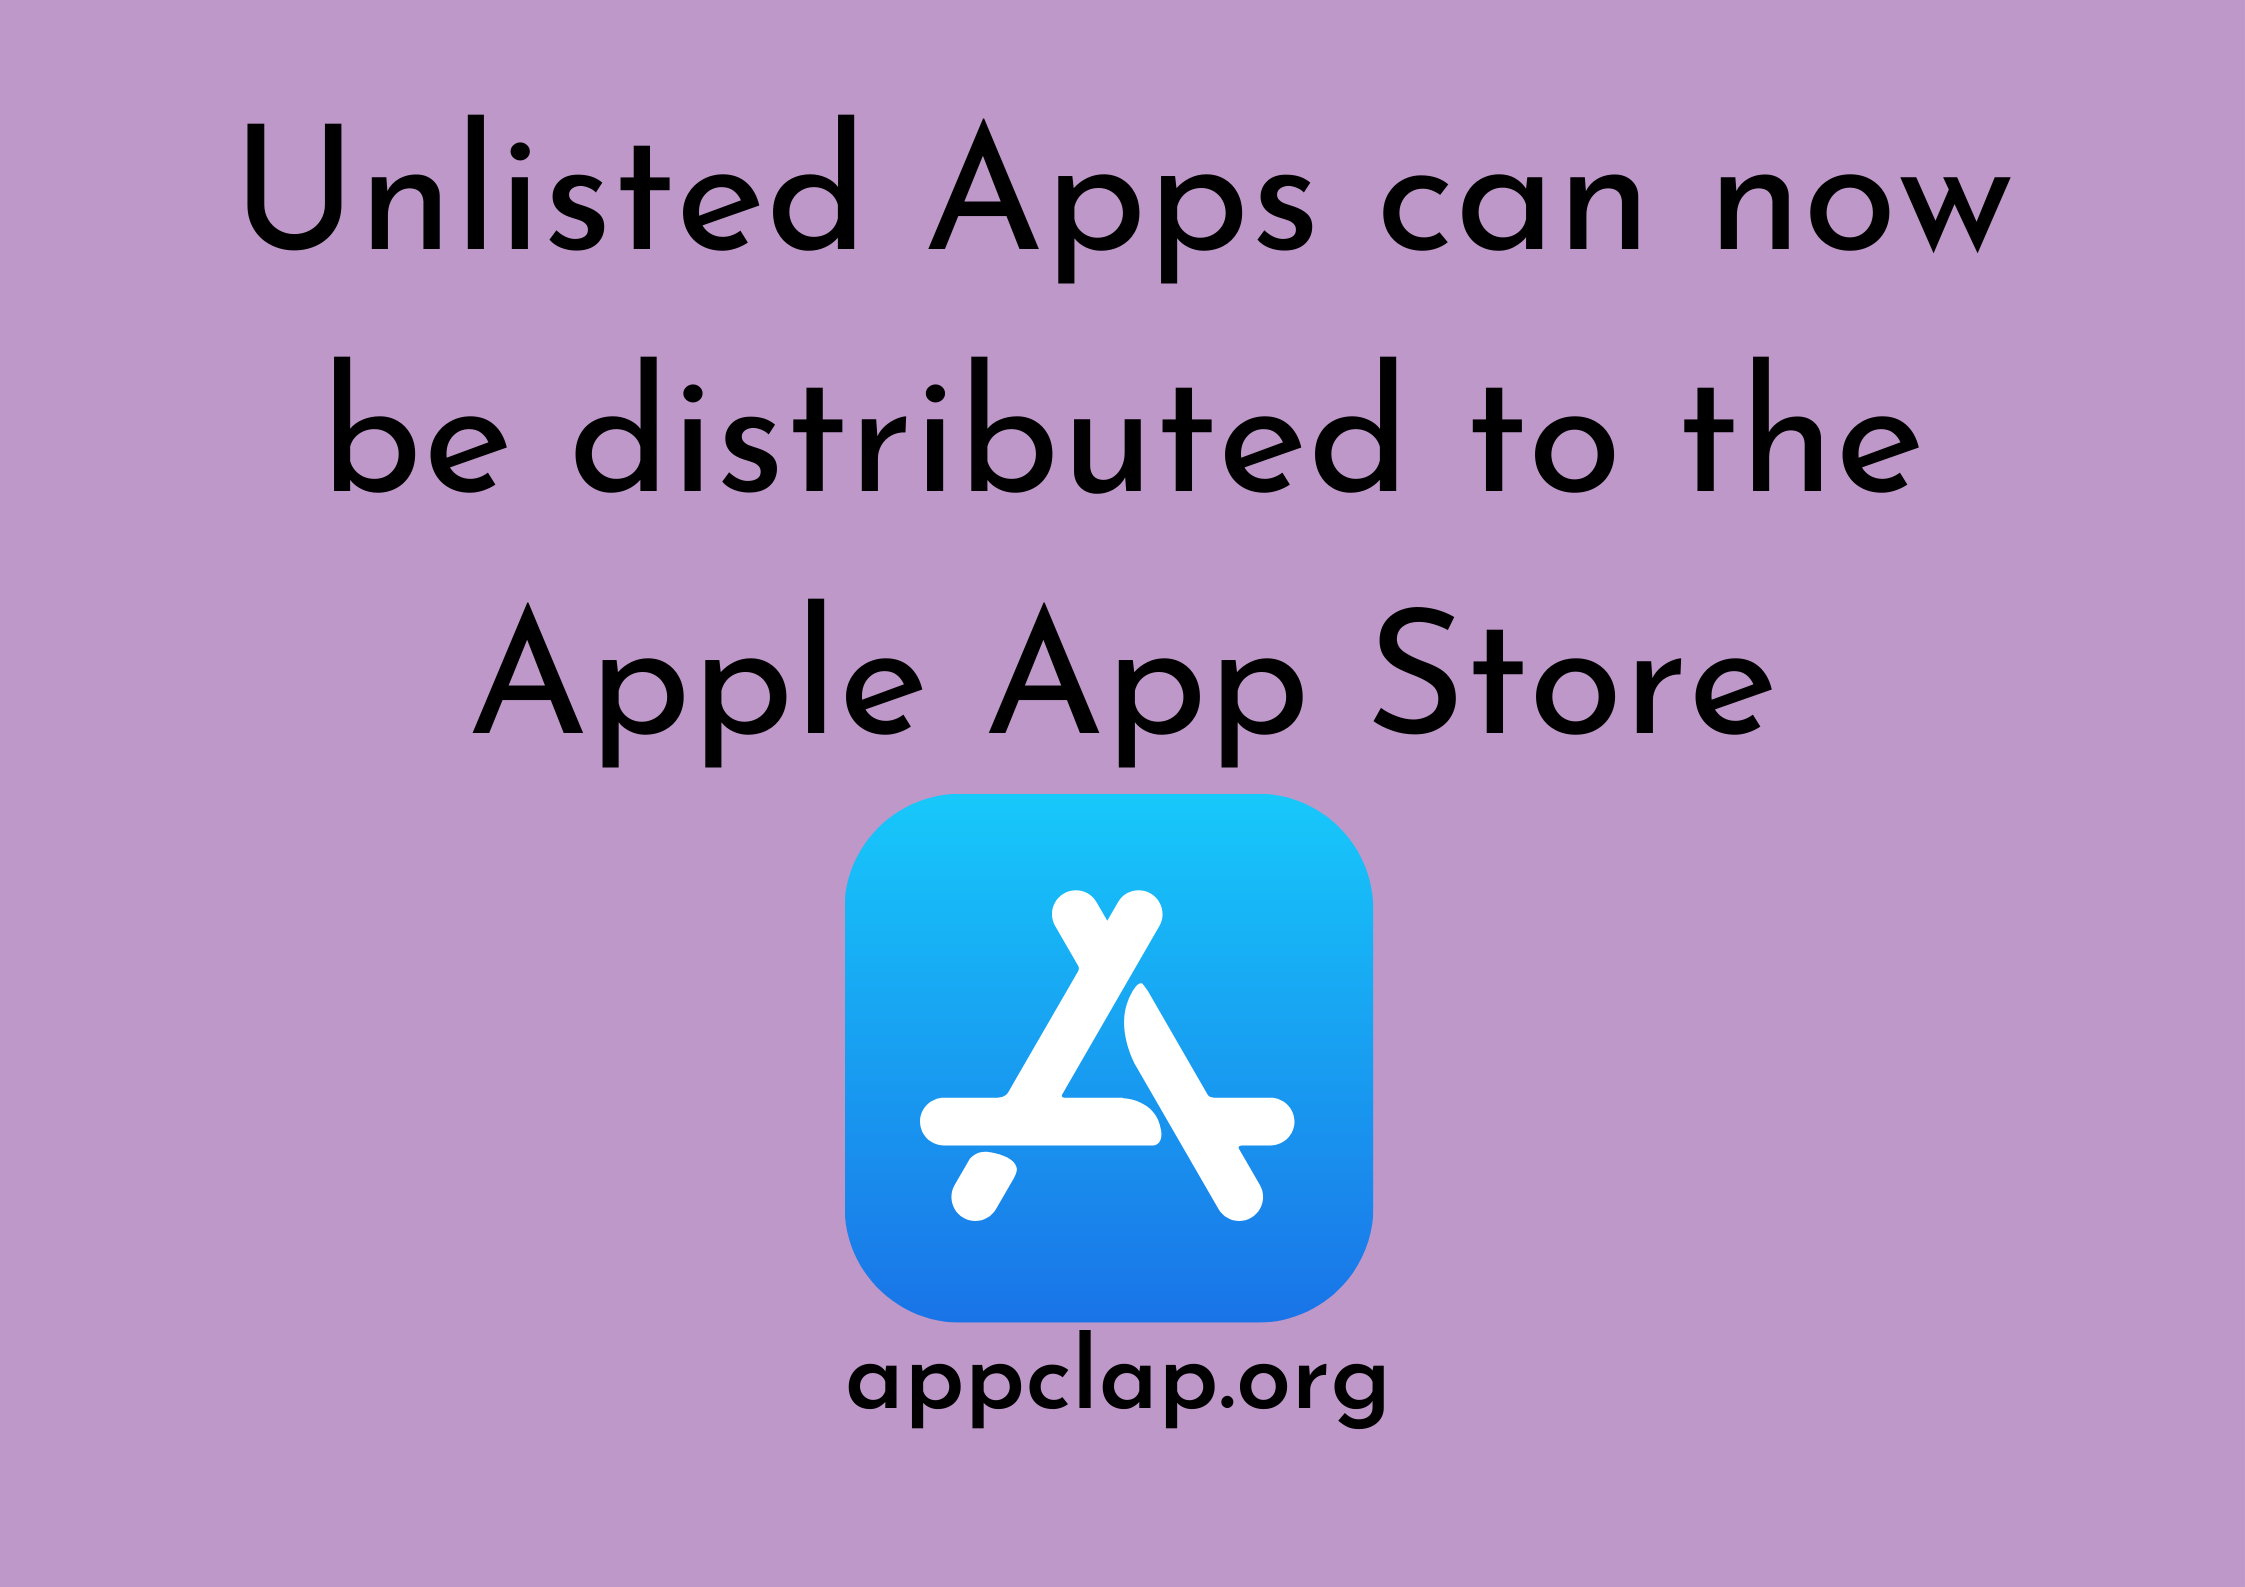 Unlisted Apps can now be distributed to the Apple App Store